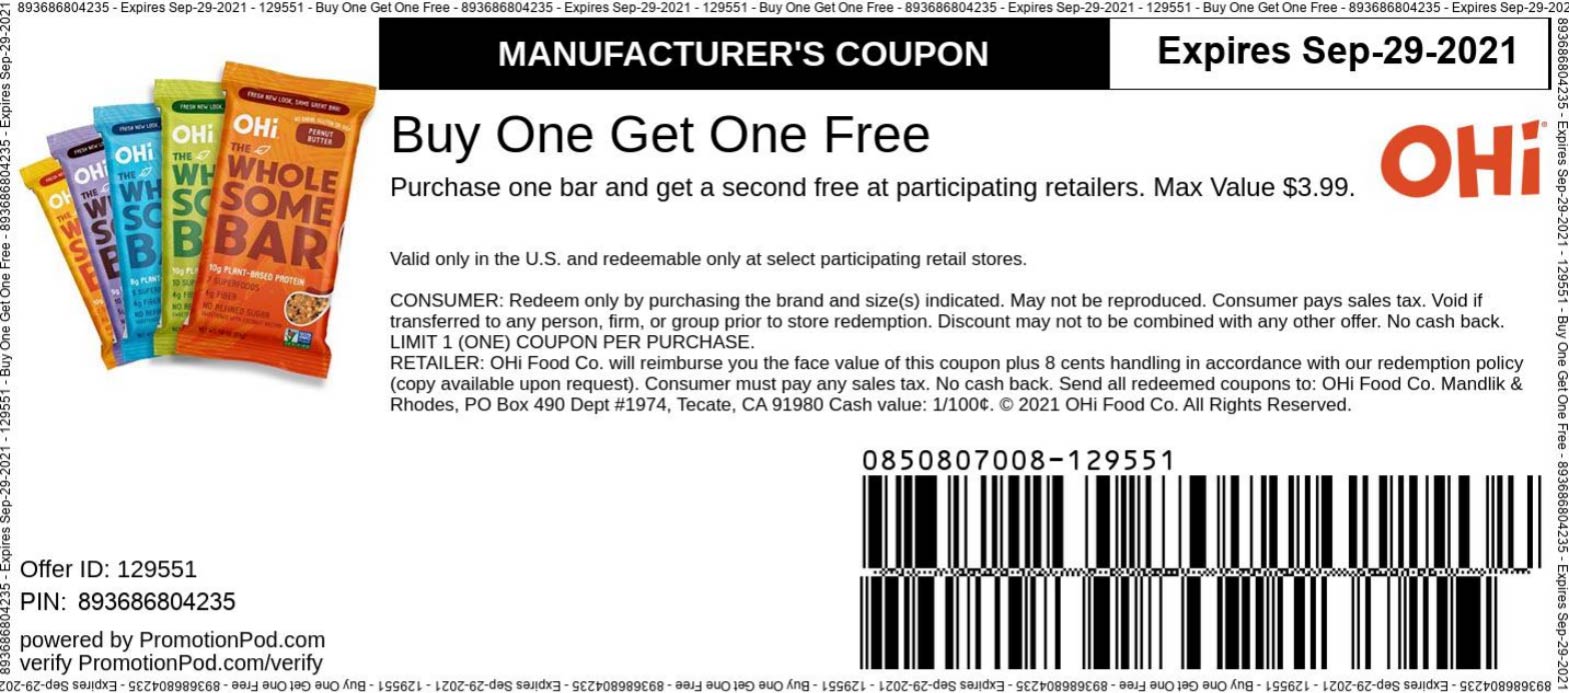 OHi restaurants Coupon  Second $4 OHi protein bar free #ohi 